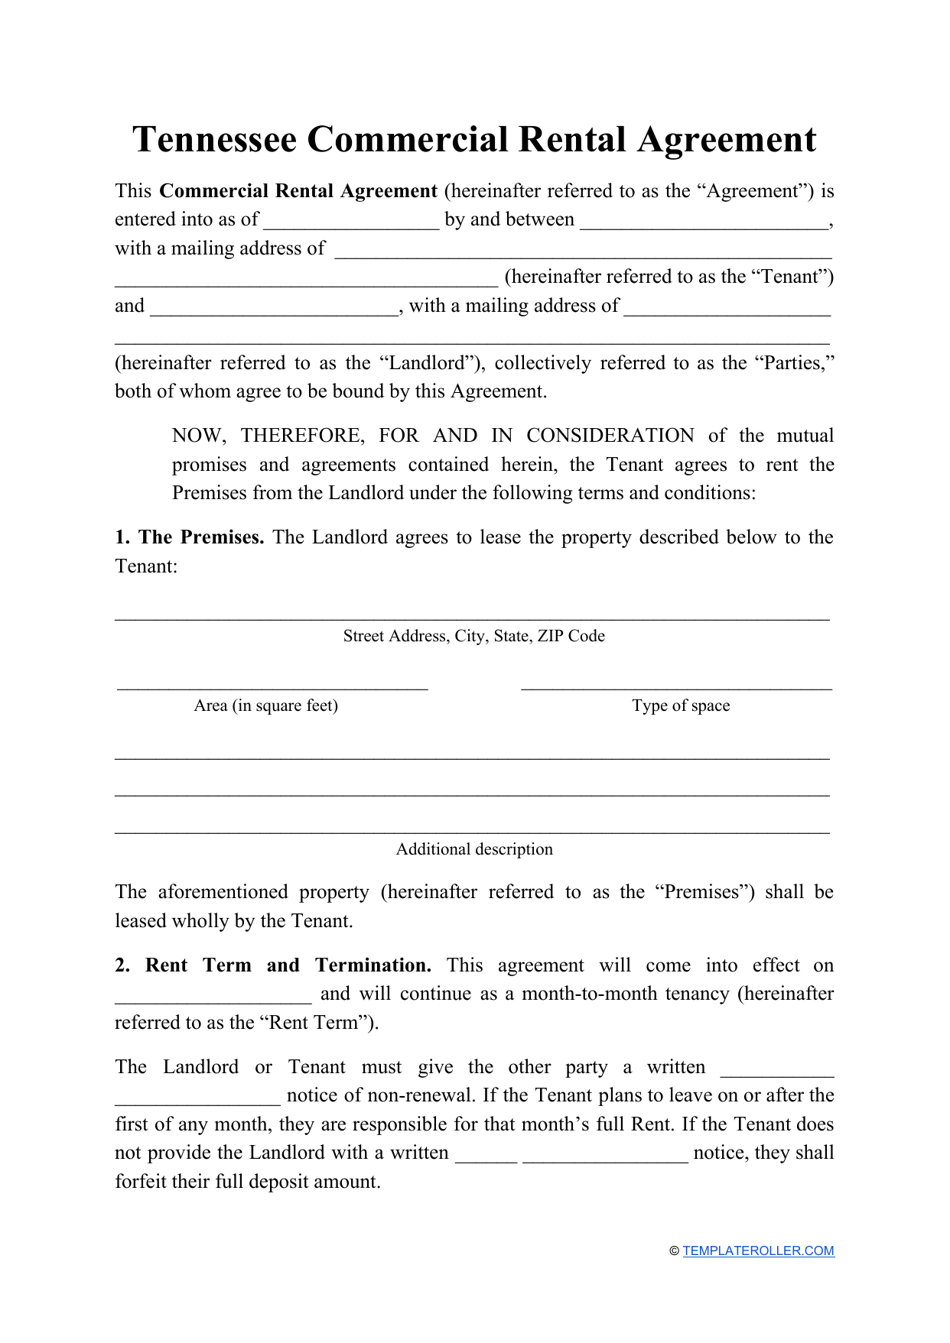 Commercial Rental Agreement Template - Tennessee, Page 1